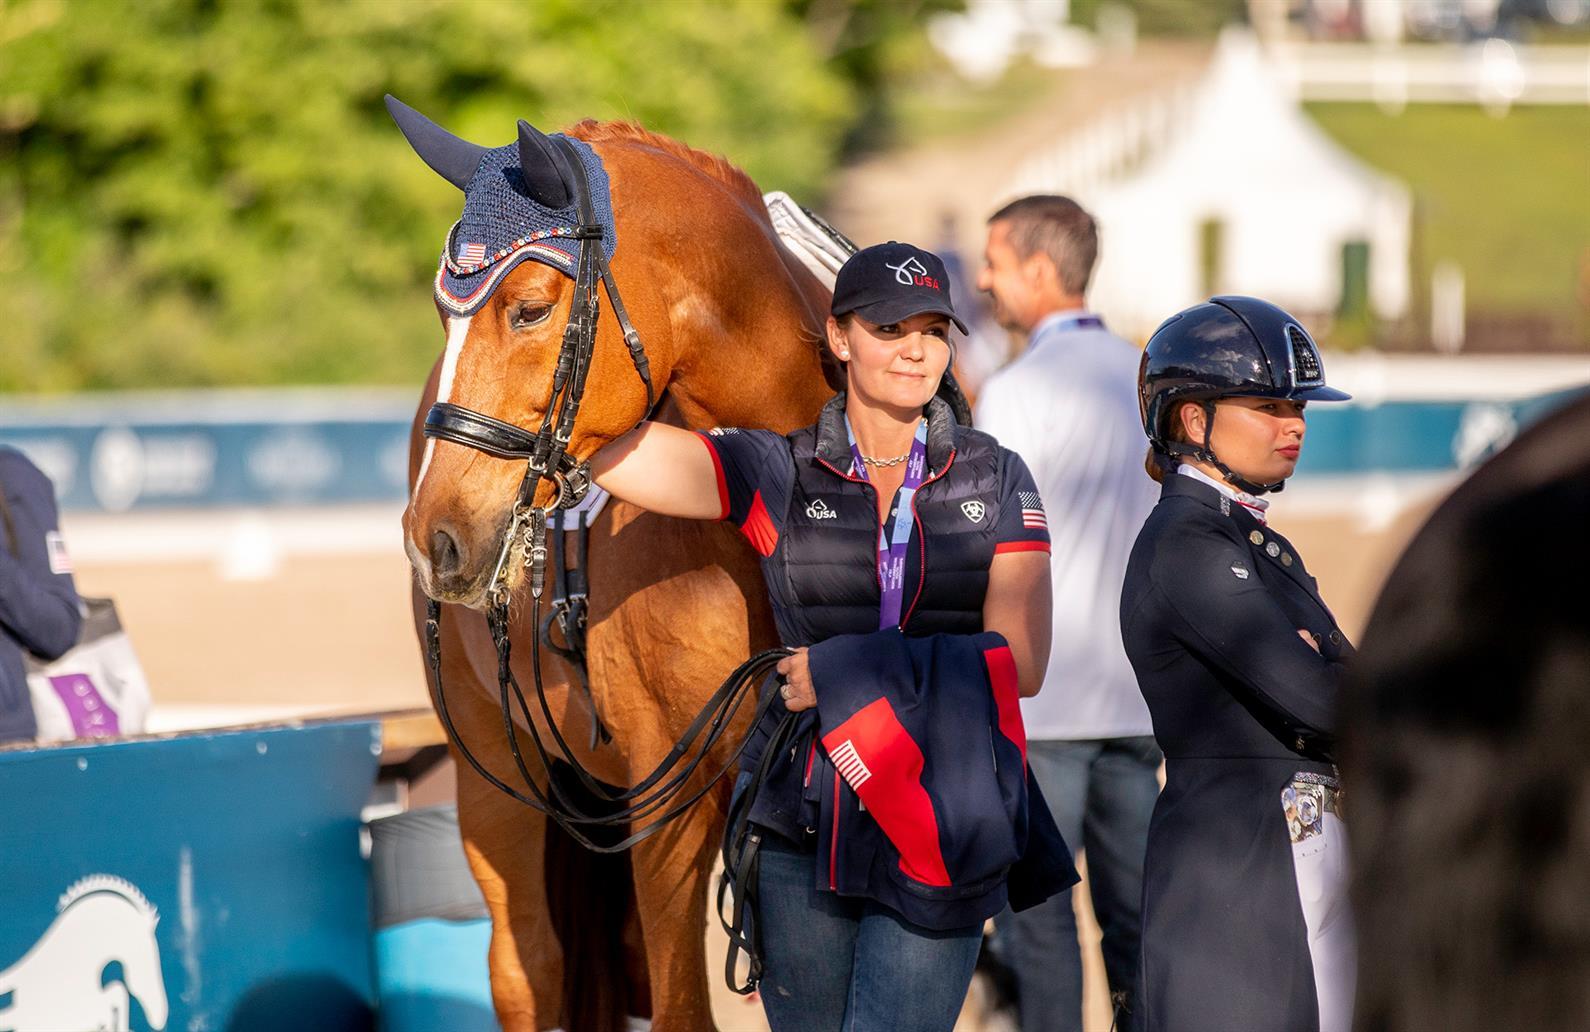 Photo showcasing the 2023 FEI North American Youth Championships